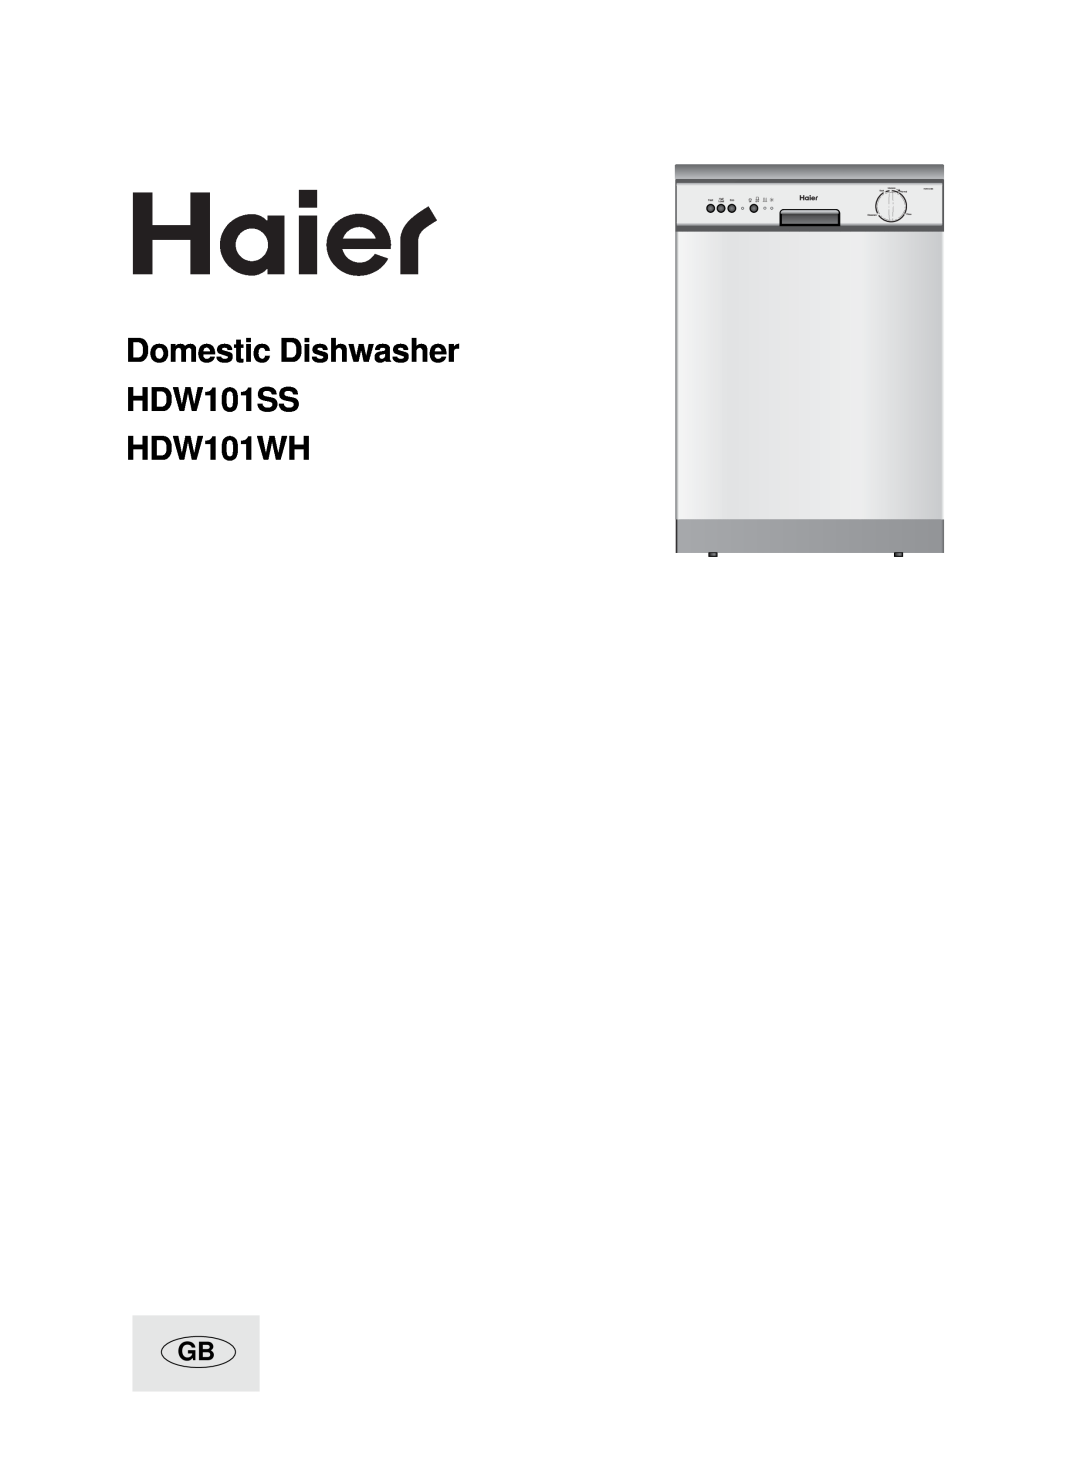 Haier manual Domestic Dishwasher HDW101SS HDW101WH 